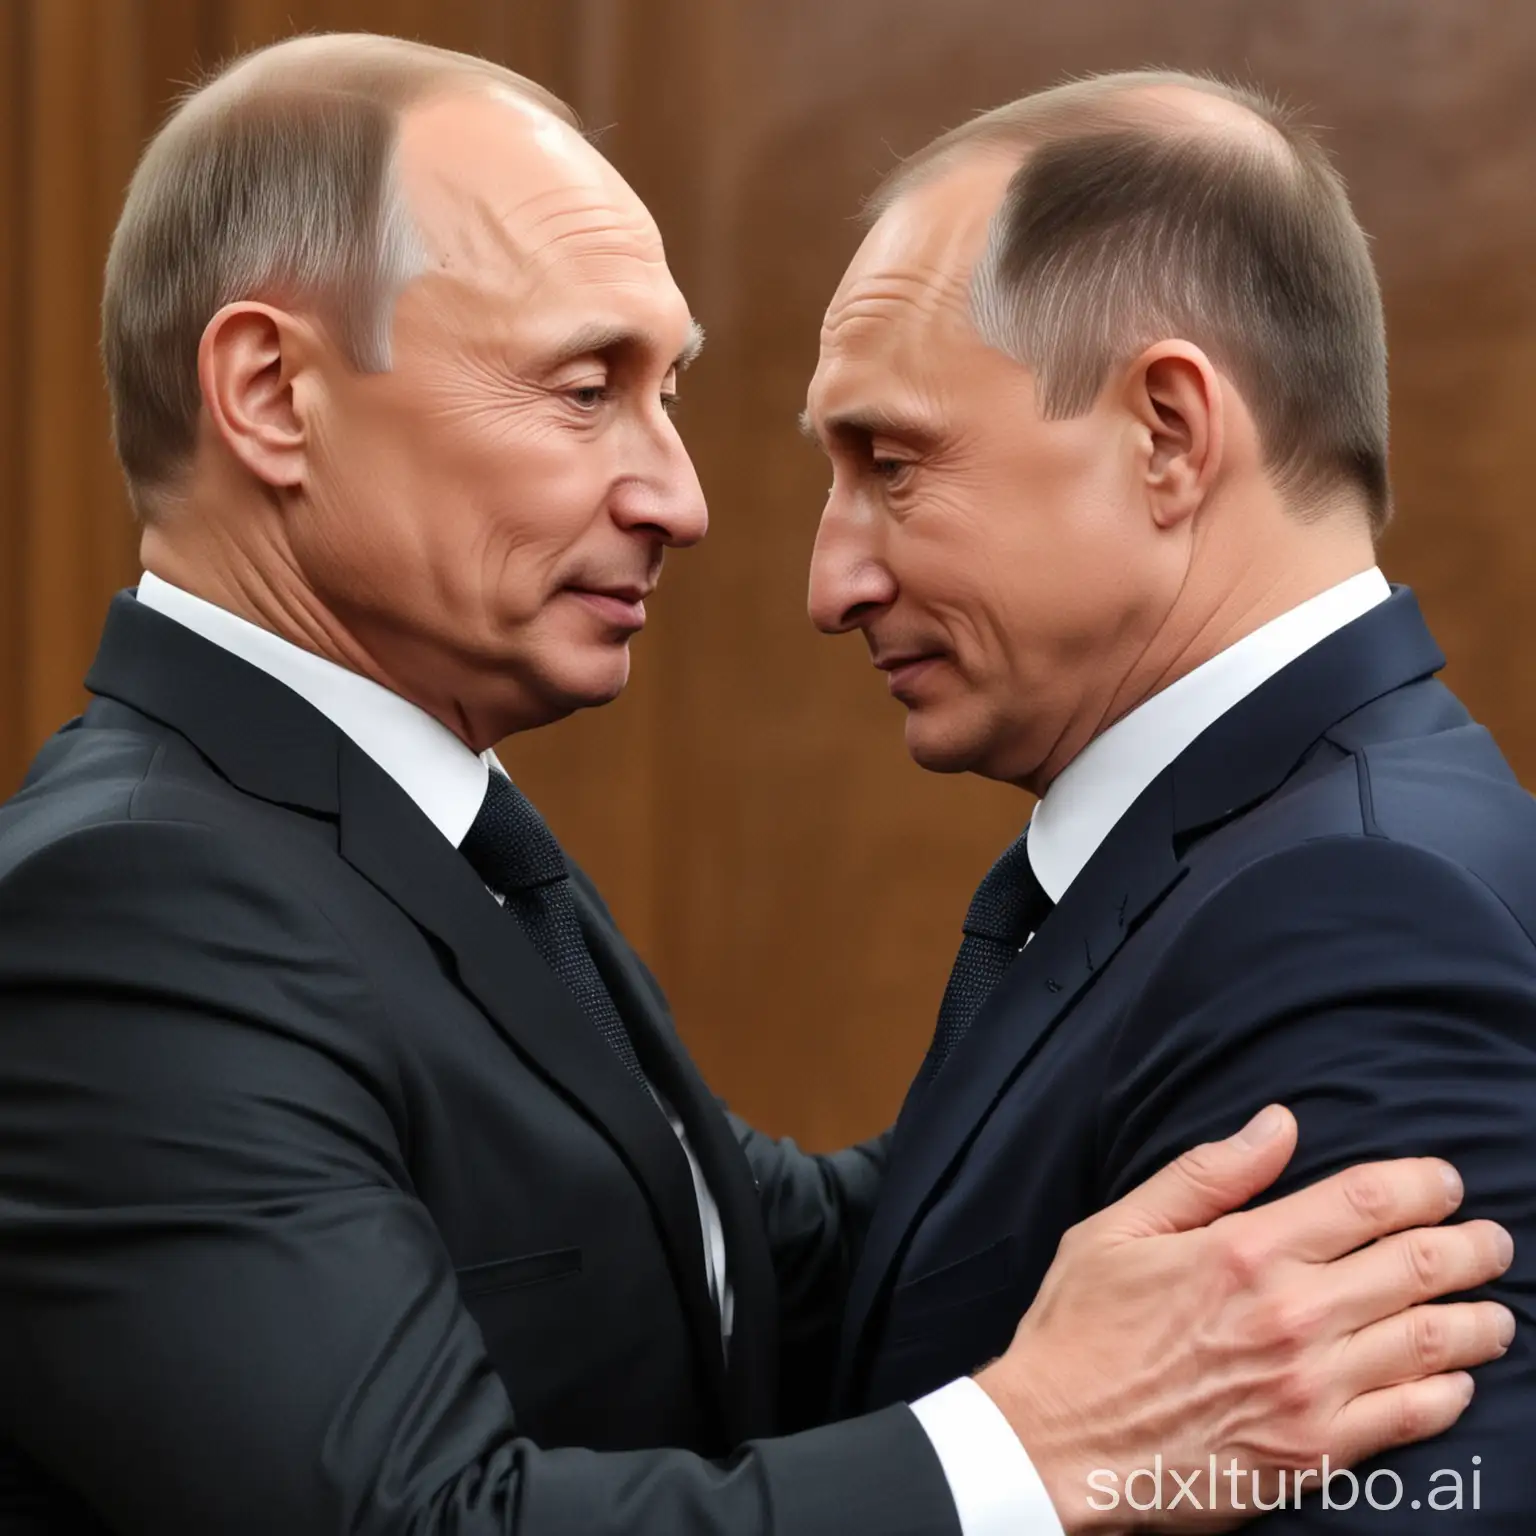 Putin-and-Zelensky-Embrace-in-Diplomatic-Gesture-of-Unity